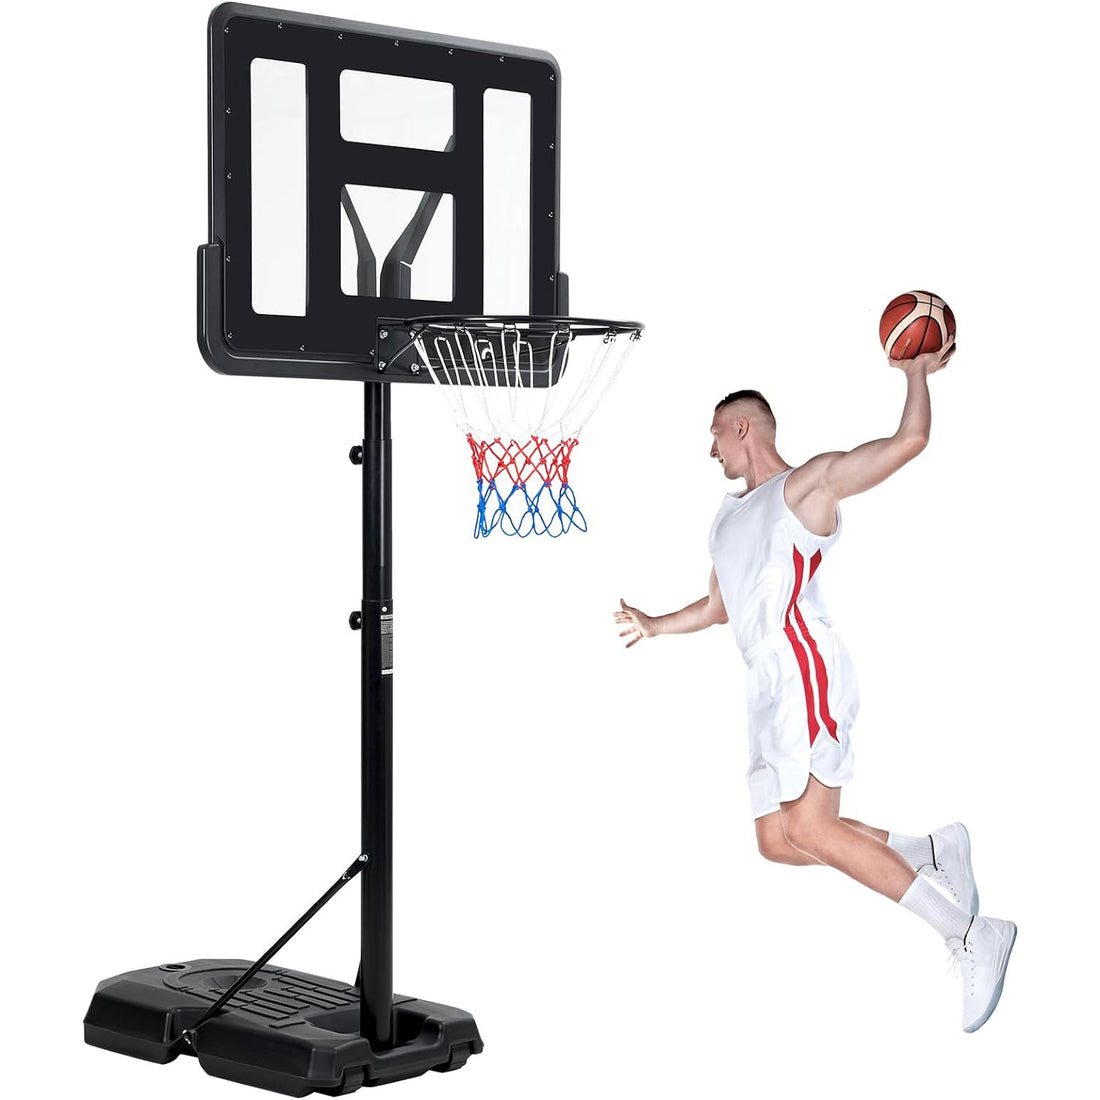 Portable Basketball Hoop Quickly Height Adjusted 6.6ft - 10ft Outdoor/Indoor Basketball Goal System with 44 inch Shatterproof Backboard and Wheels for Adults